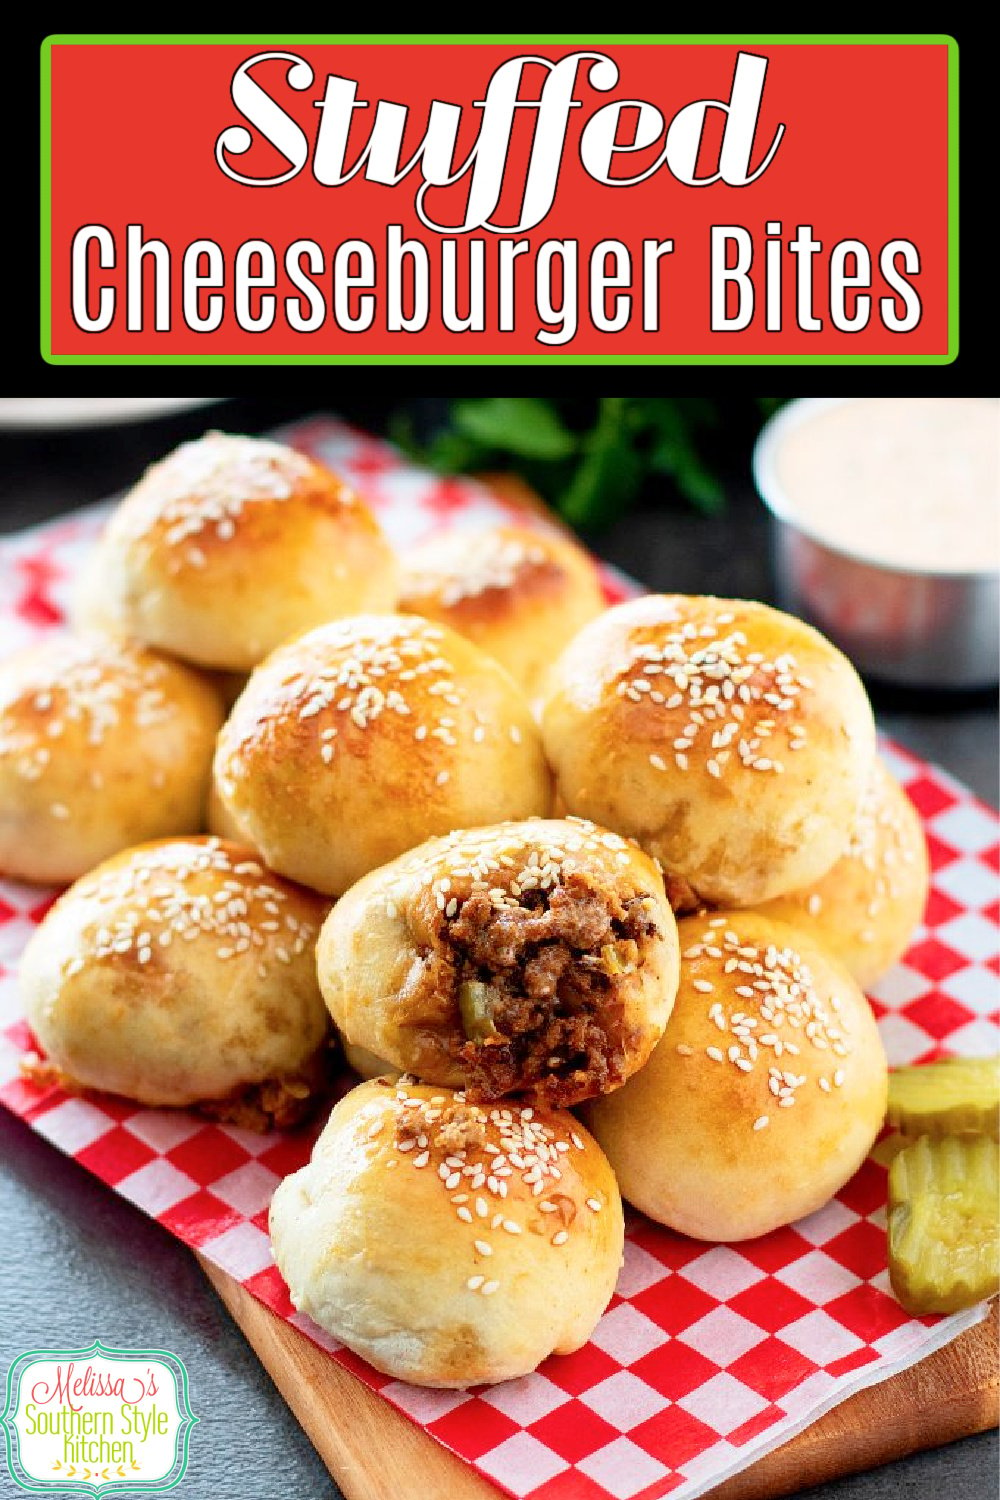 Skip the bun, and enjoy these winning Cheeseburger Bites for casual meals and game day snacks #cheeseburgers #cheeseburgerbites #easyappetizerrecipes #hamburgerrecipes #snacks #southernrecipes #gamedayrecipes #easygroundbeefrecipes via @melissasssk